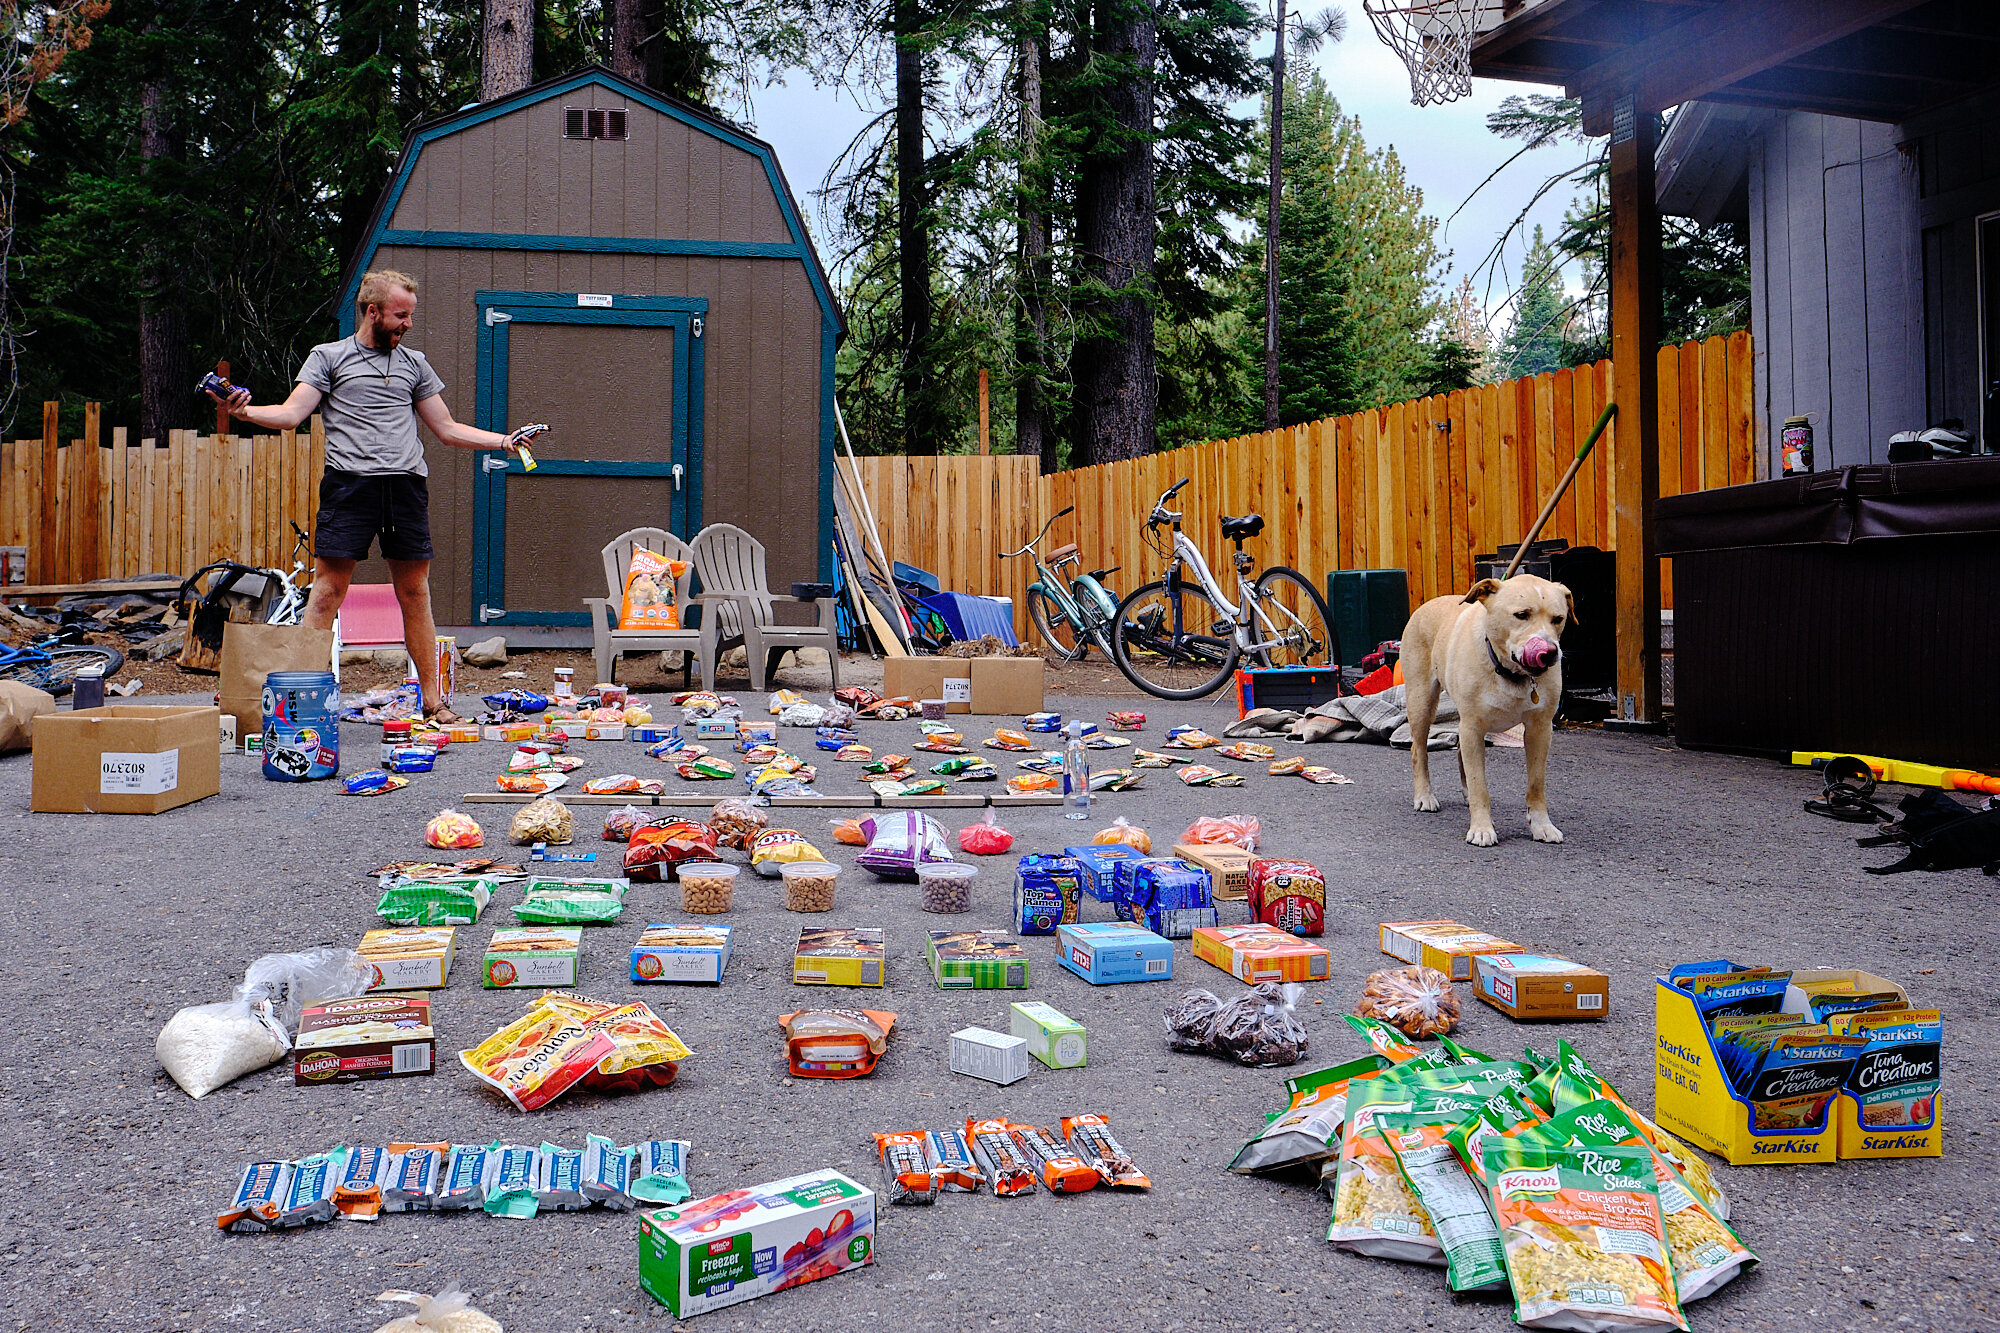  Due to COVID-19, as well as the remote nature of the Grand Sierra Traverse, hitchhiking into town wasn't an option for resupply. Lebowski and I ended up buying a months worth of food ahead of time and orchestrated food drops in trailhead bear boxes 